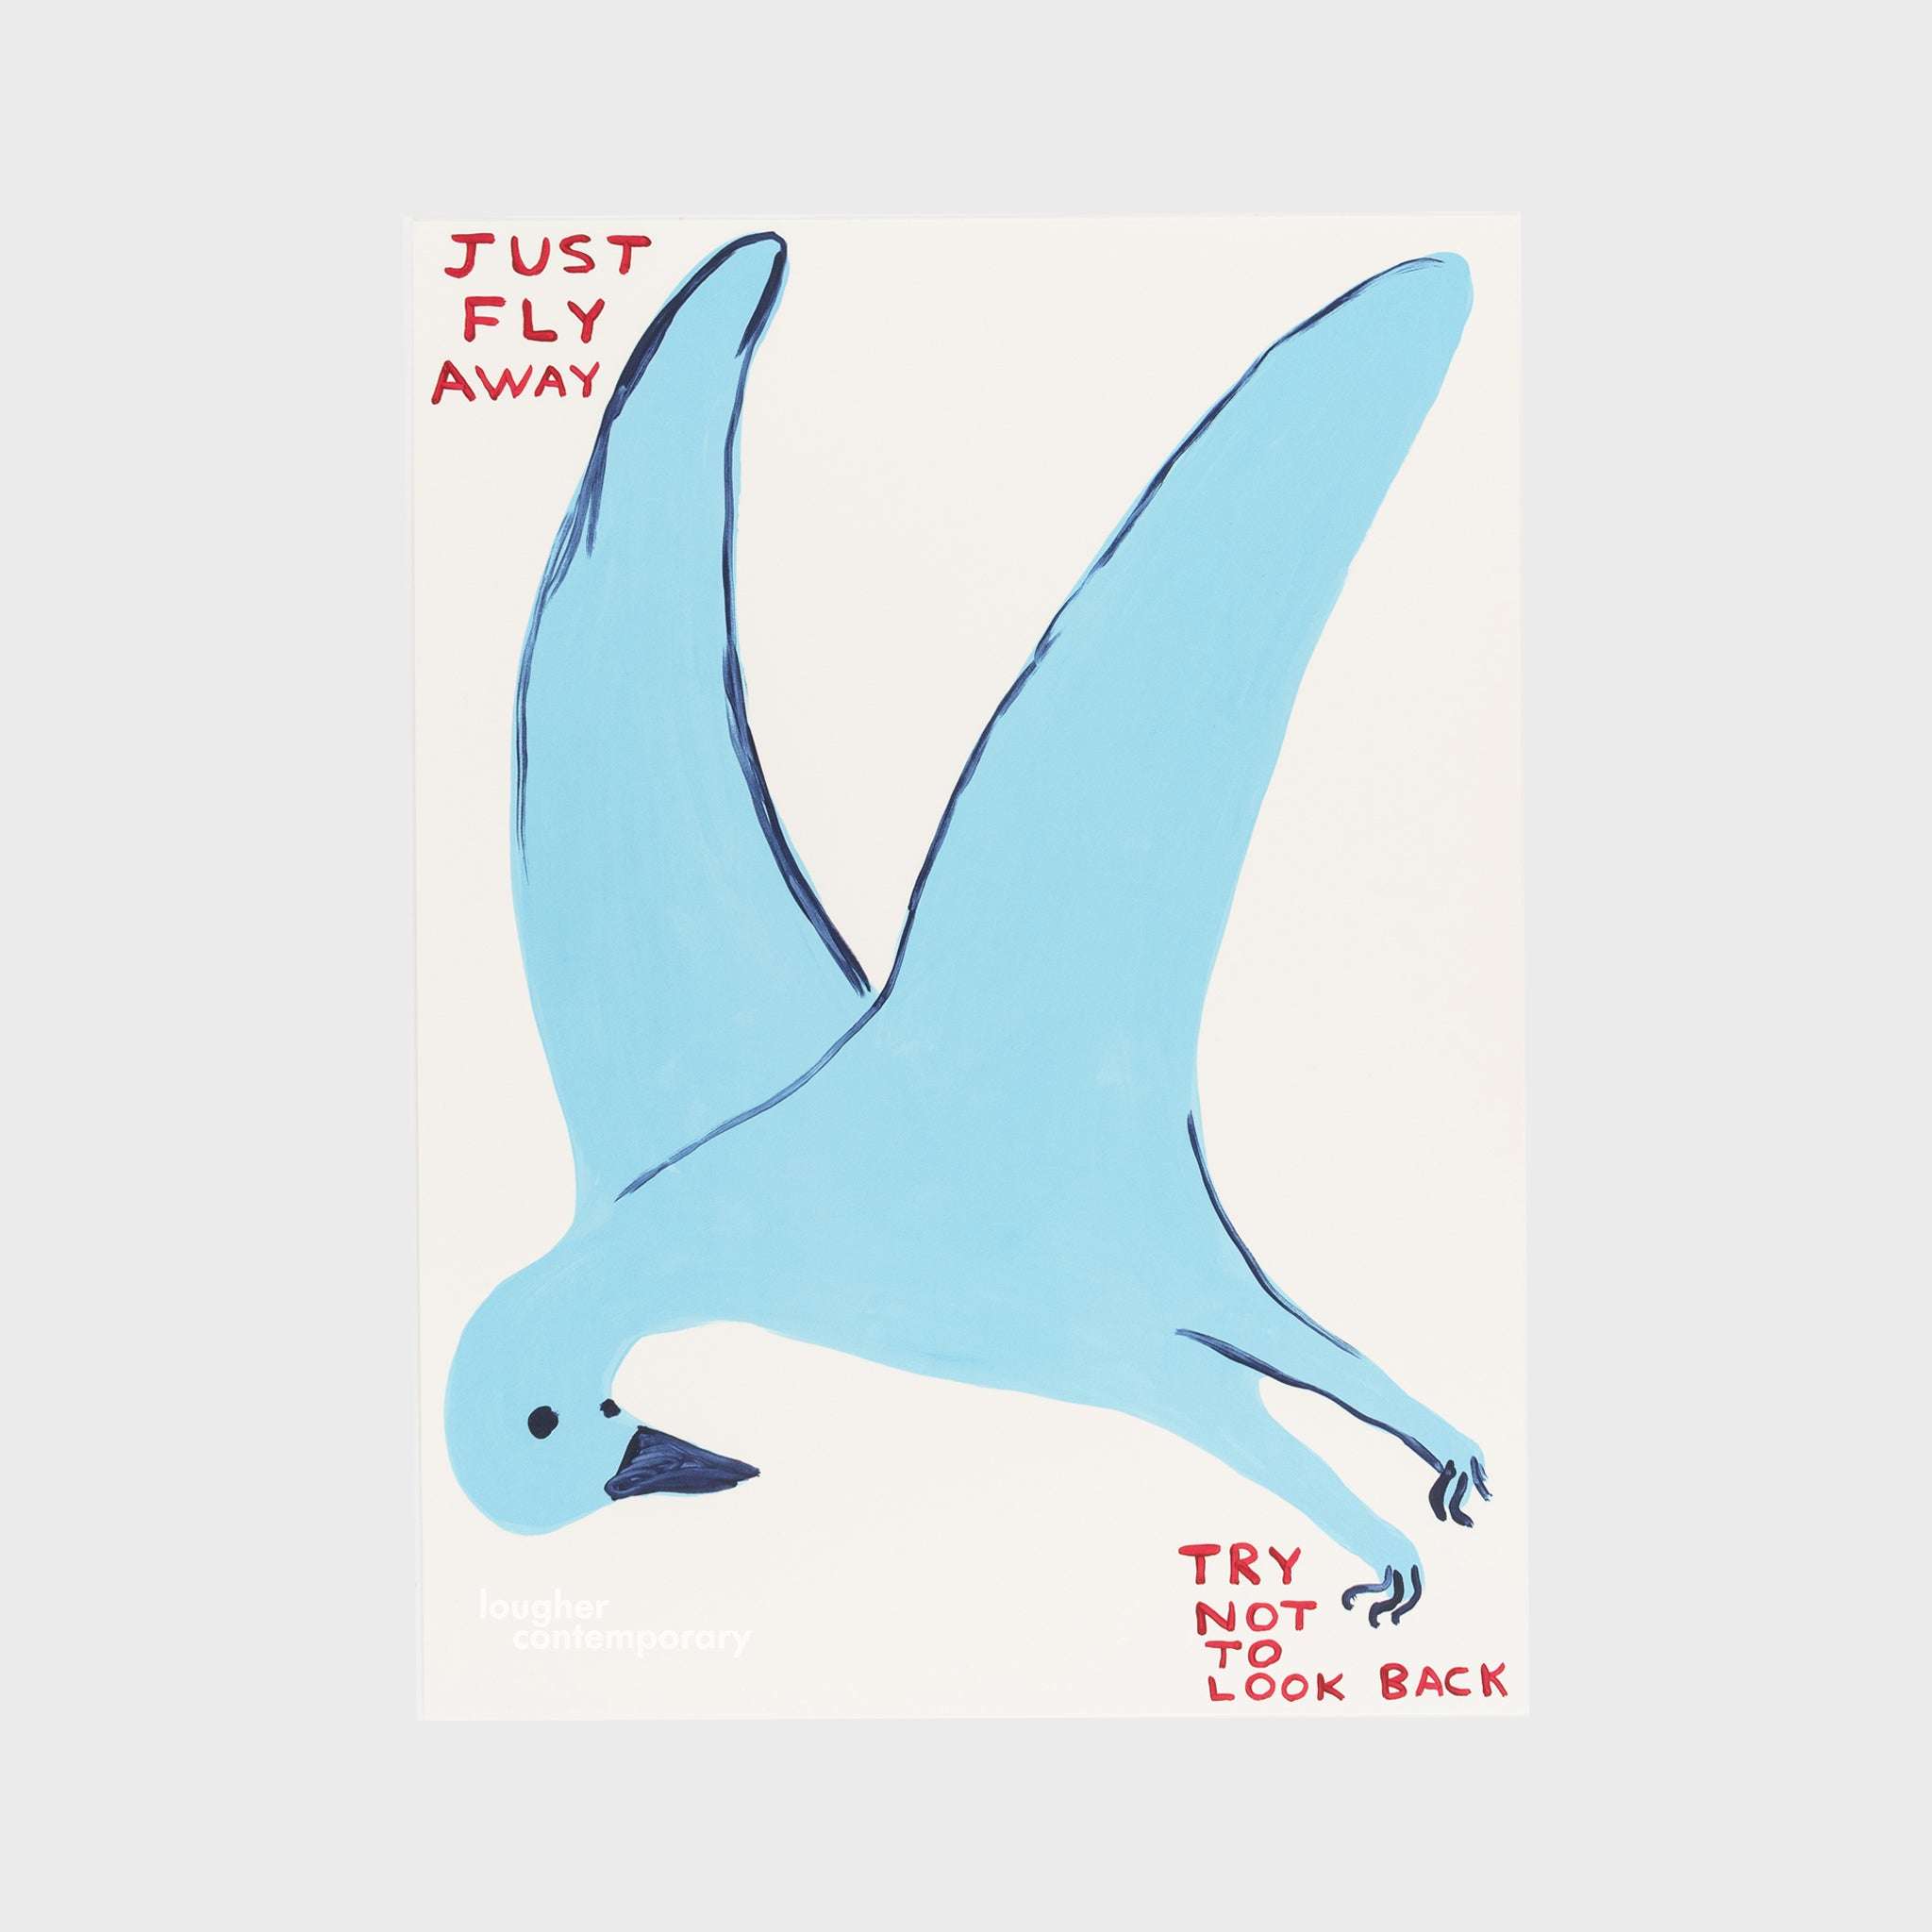 David Shrigley, Untitled (Just Fly Away, Try Not To Look Back), 2022 For Sale - Lougher Contemporary